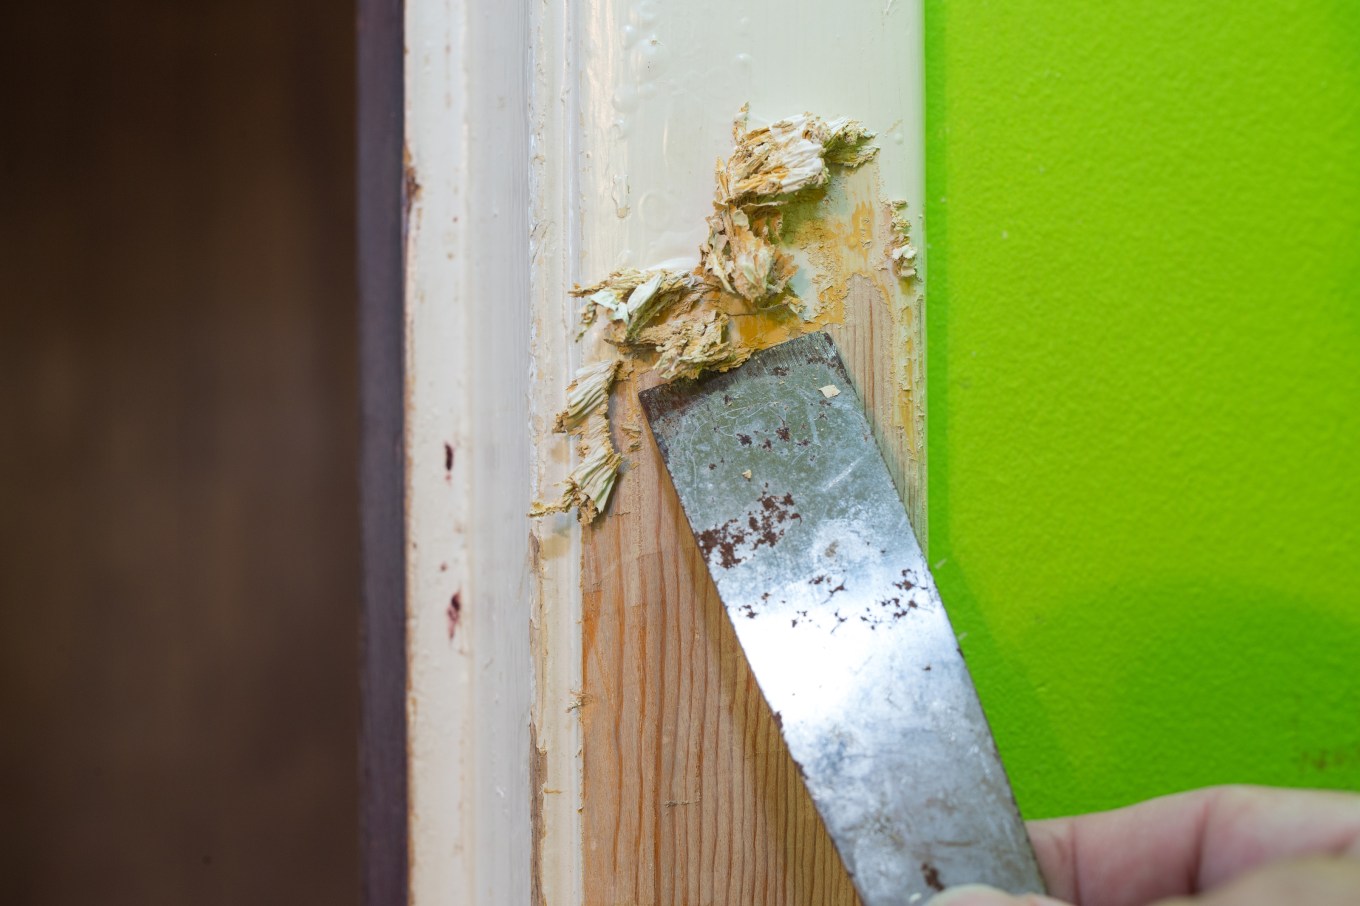 Removing layers of white paint on a frame next to a green wall.